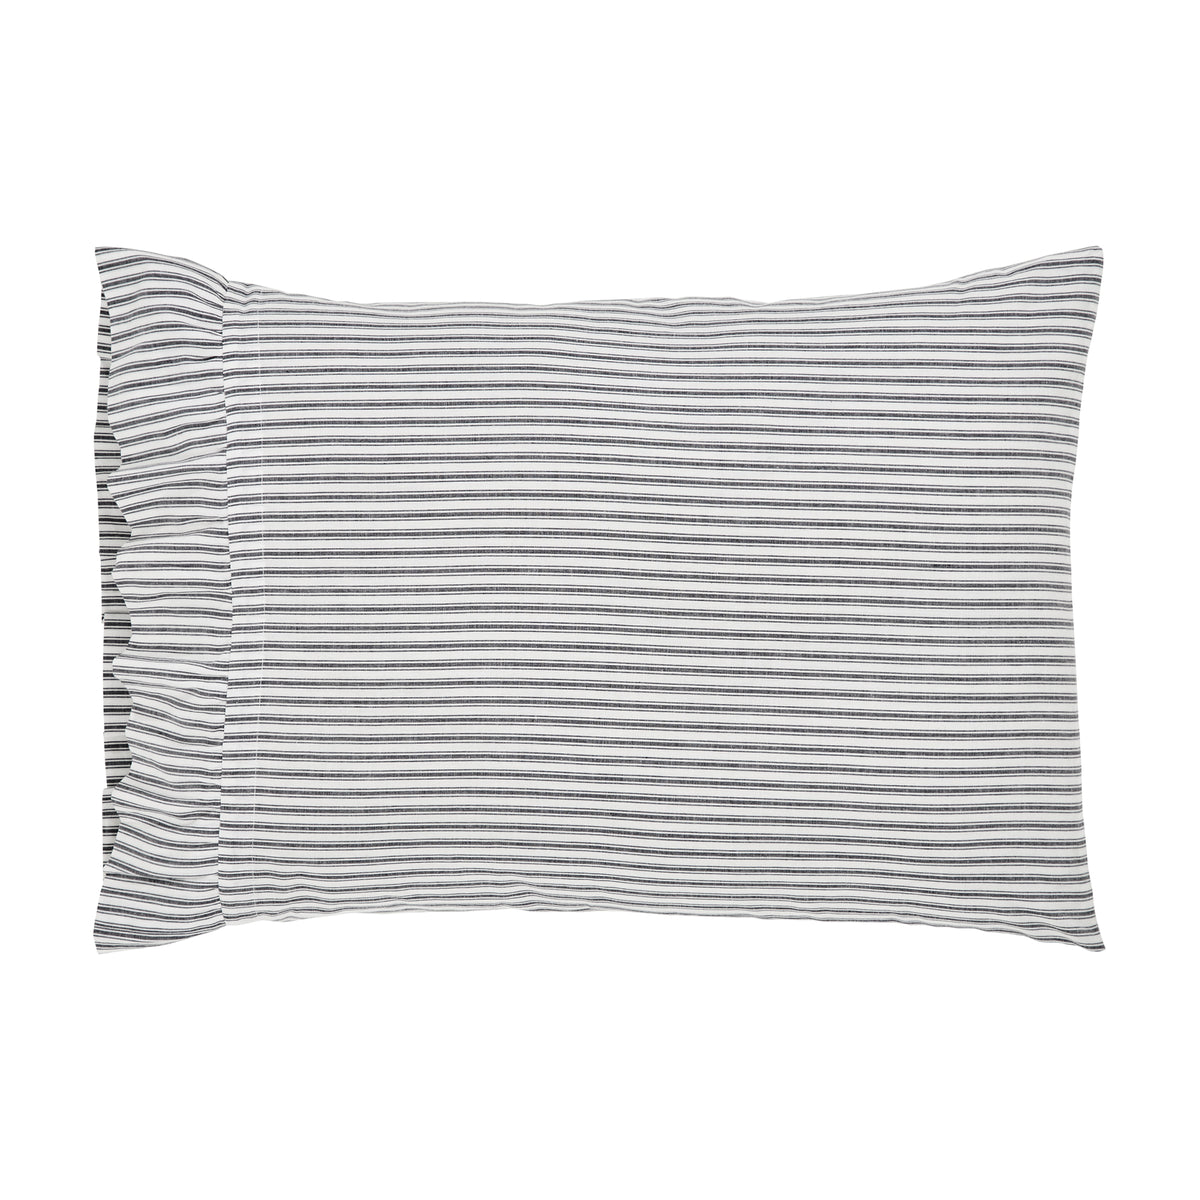 April & Olive Sawyer Mill Black Ruffled Ticking Stripe Standard Pillow Case Set of 2 21x26+4 By VHC Brands